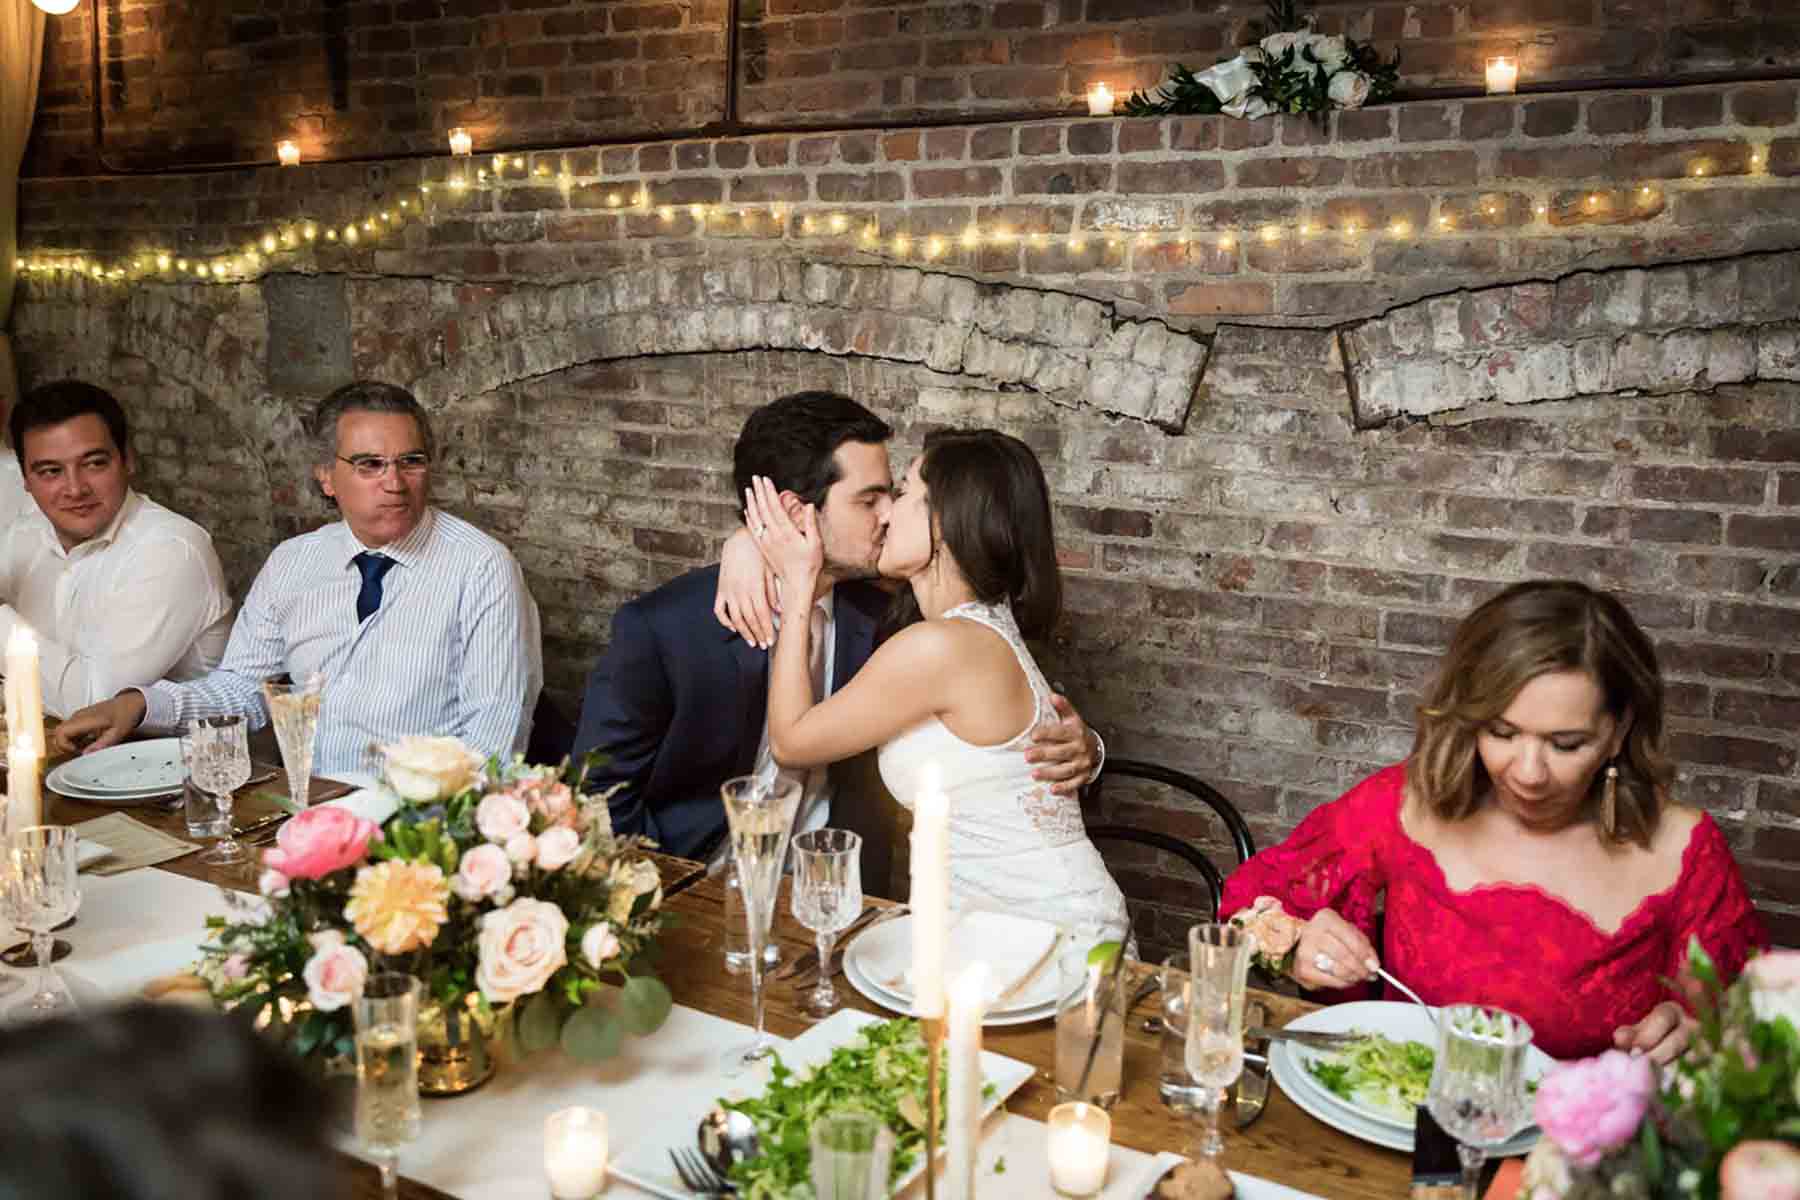 Bride and groom kissing at table in front of brick wall for an article on how to save money on wedding photography